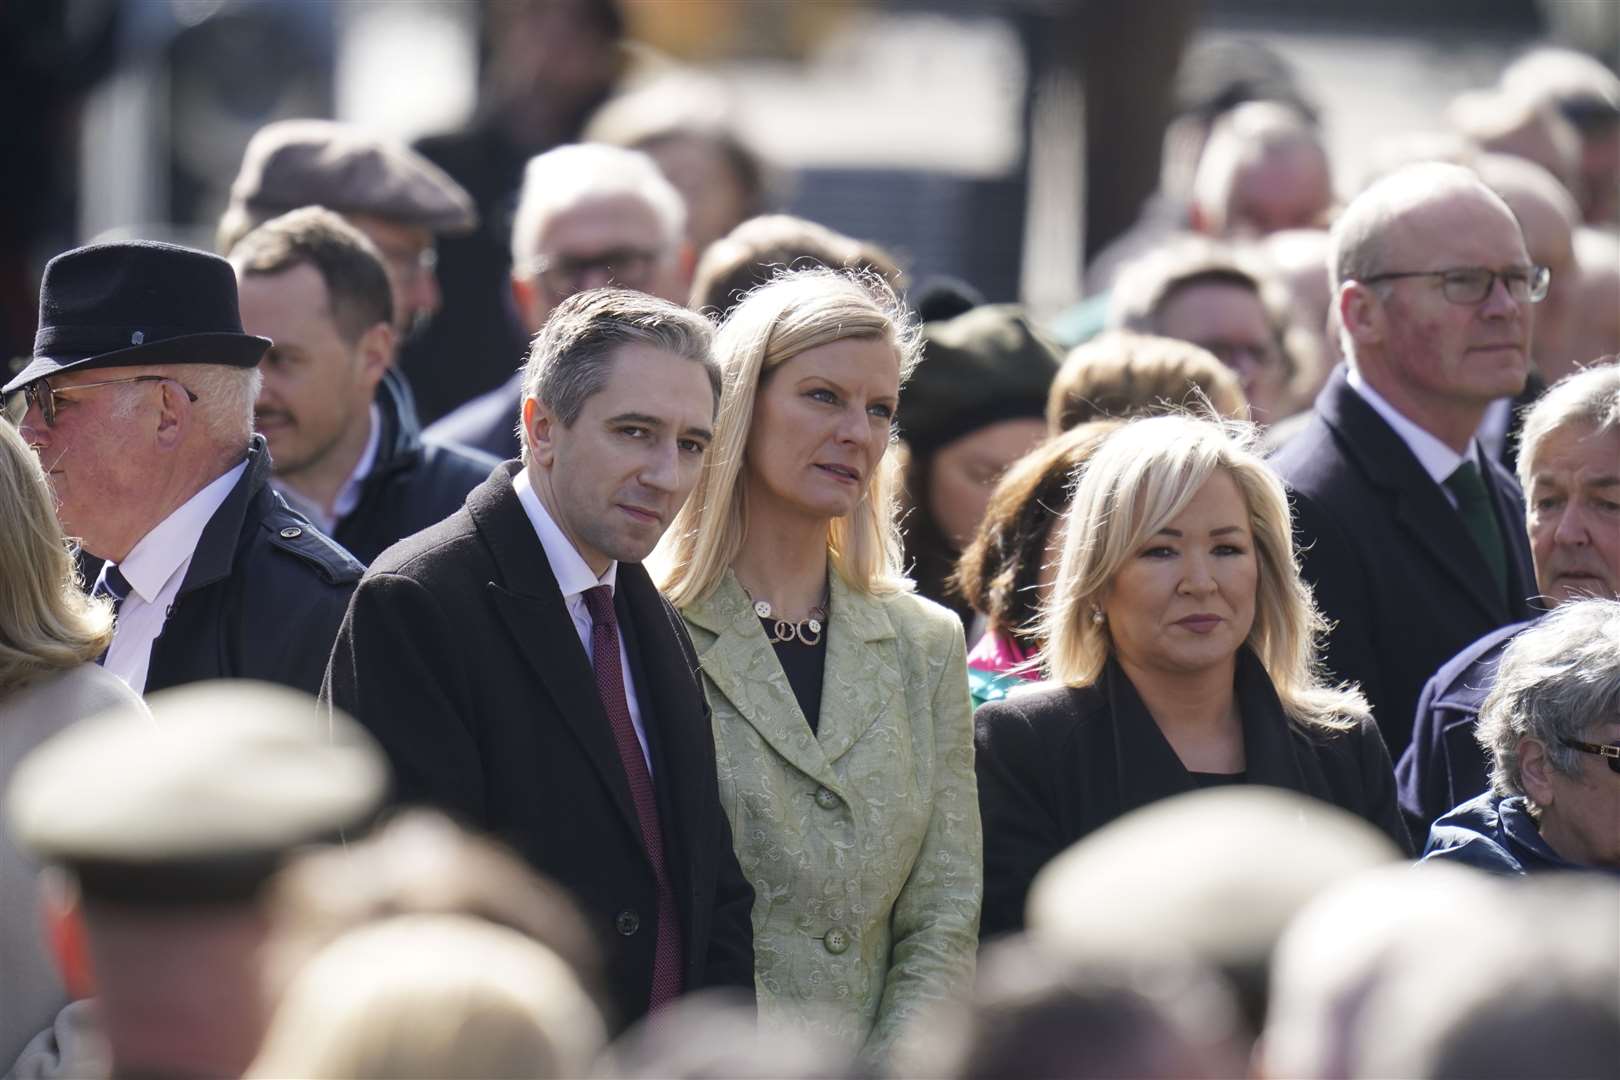 Fine Gael leader and Further Education Minister Simon Harris and First Minister of Northern Ireland Michelle O’Neill during a ceremony at the GPO on O’Connell Street in Dublin to mark the anniversary of the 1916 Easter Rising (Niall Carson/PA)